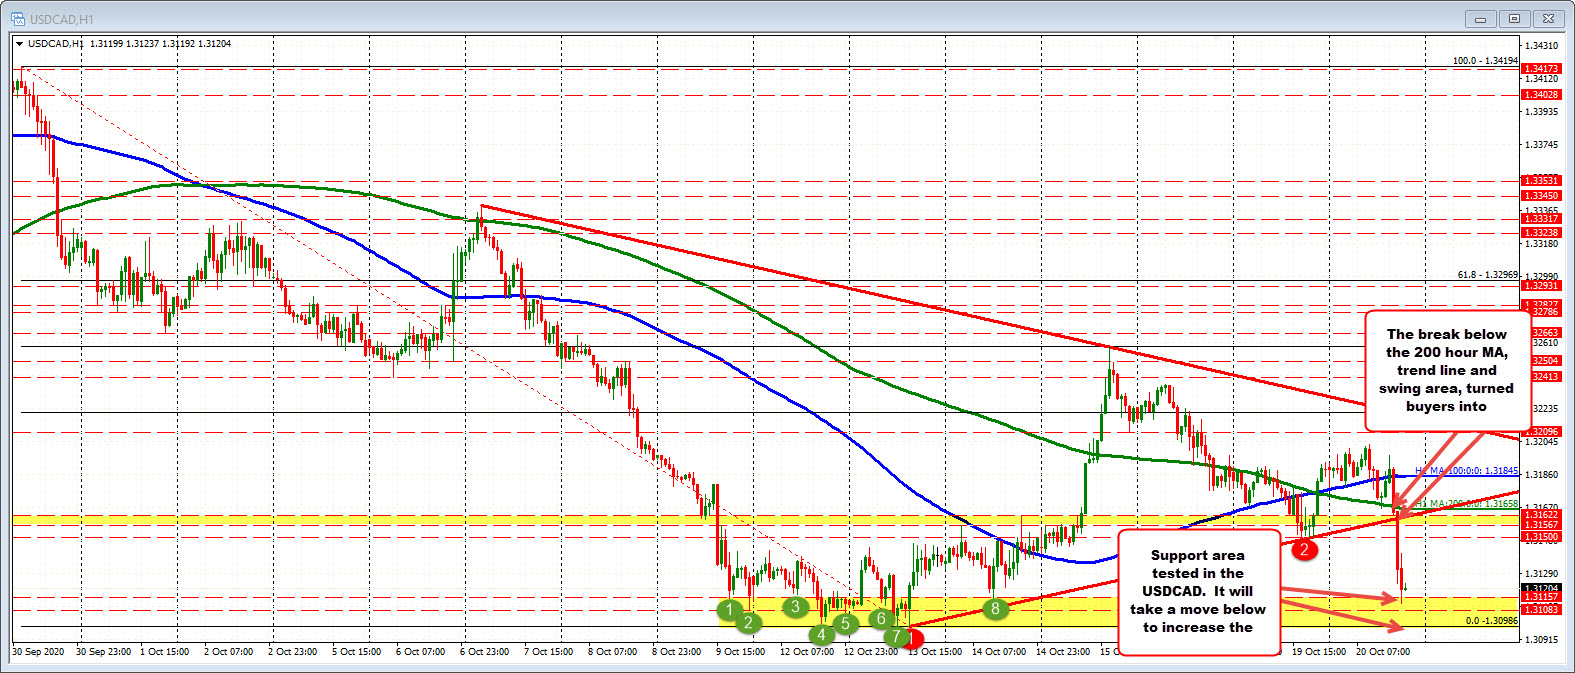 Fall below the 200 hour MA tilted the buyers back into sellers in the USDCAD